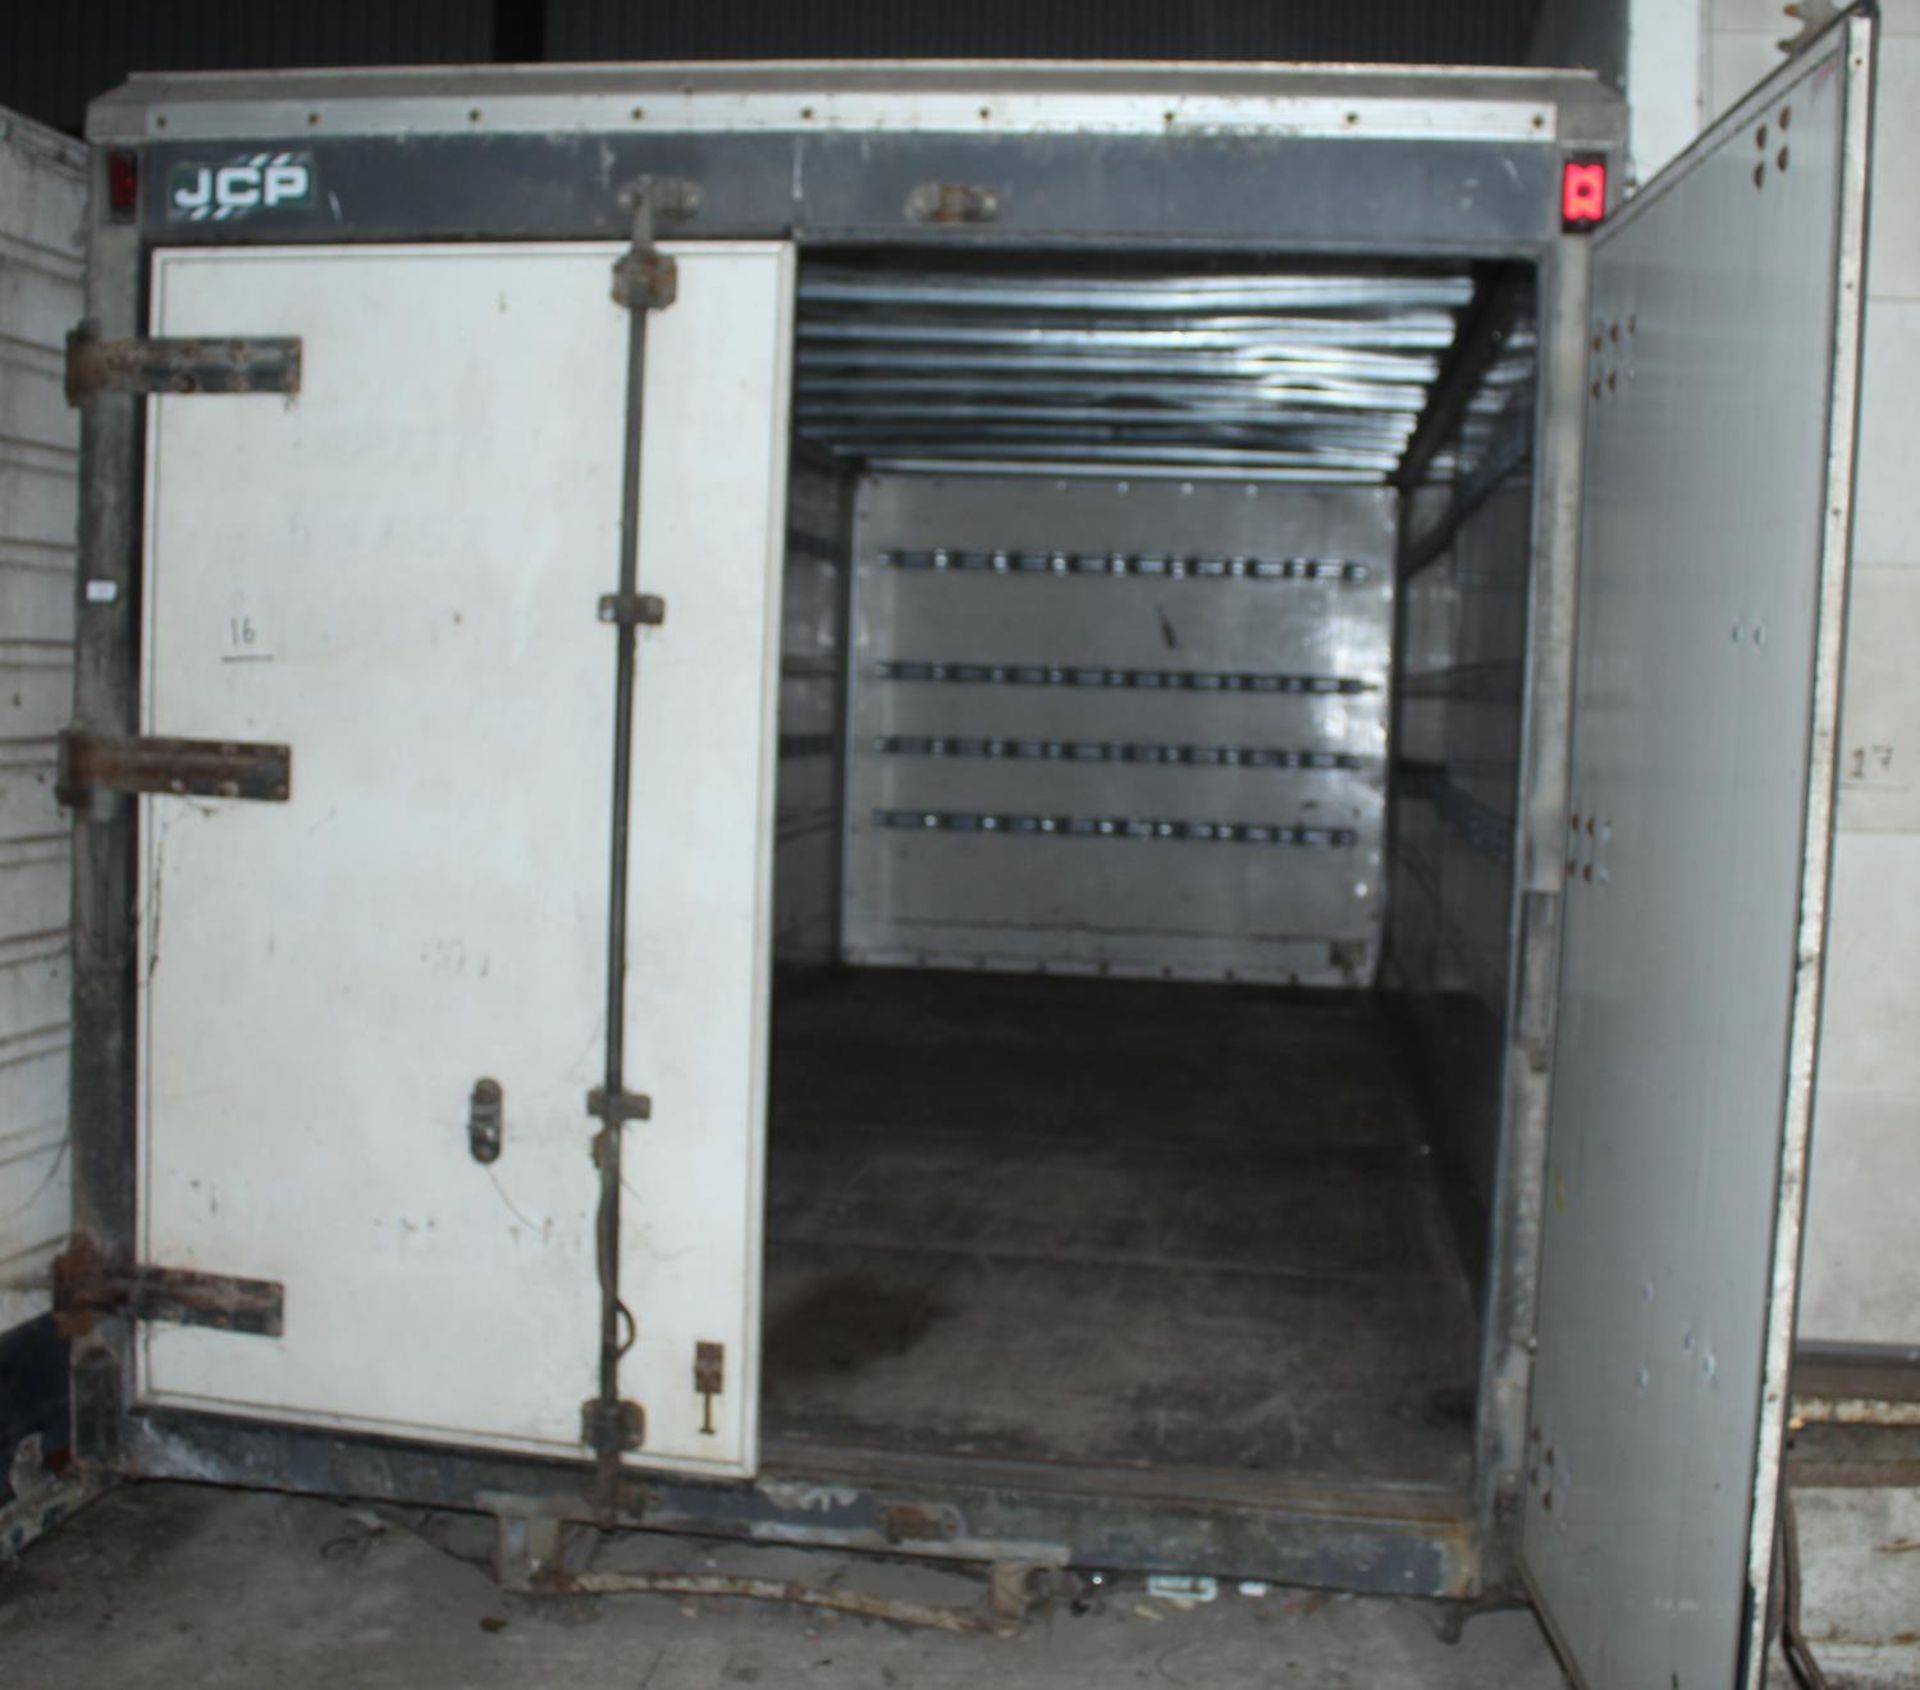 TWO LORRY BODIES 1X20' LONG 7'7 WIDE 7'7" HIGH 1X20'2" LONG 7'11" WIDE 3" WIDE (BARN DOORS) STORED - Image 2 of 2